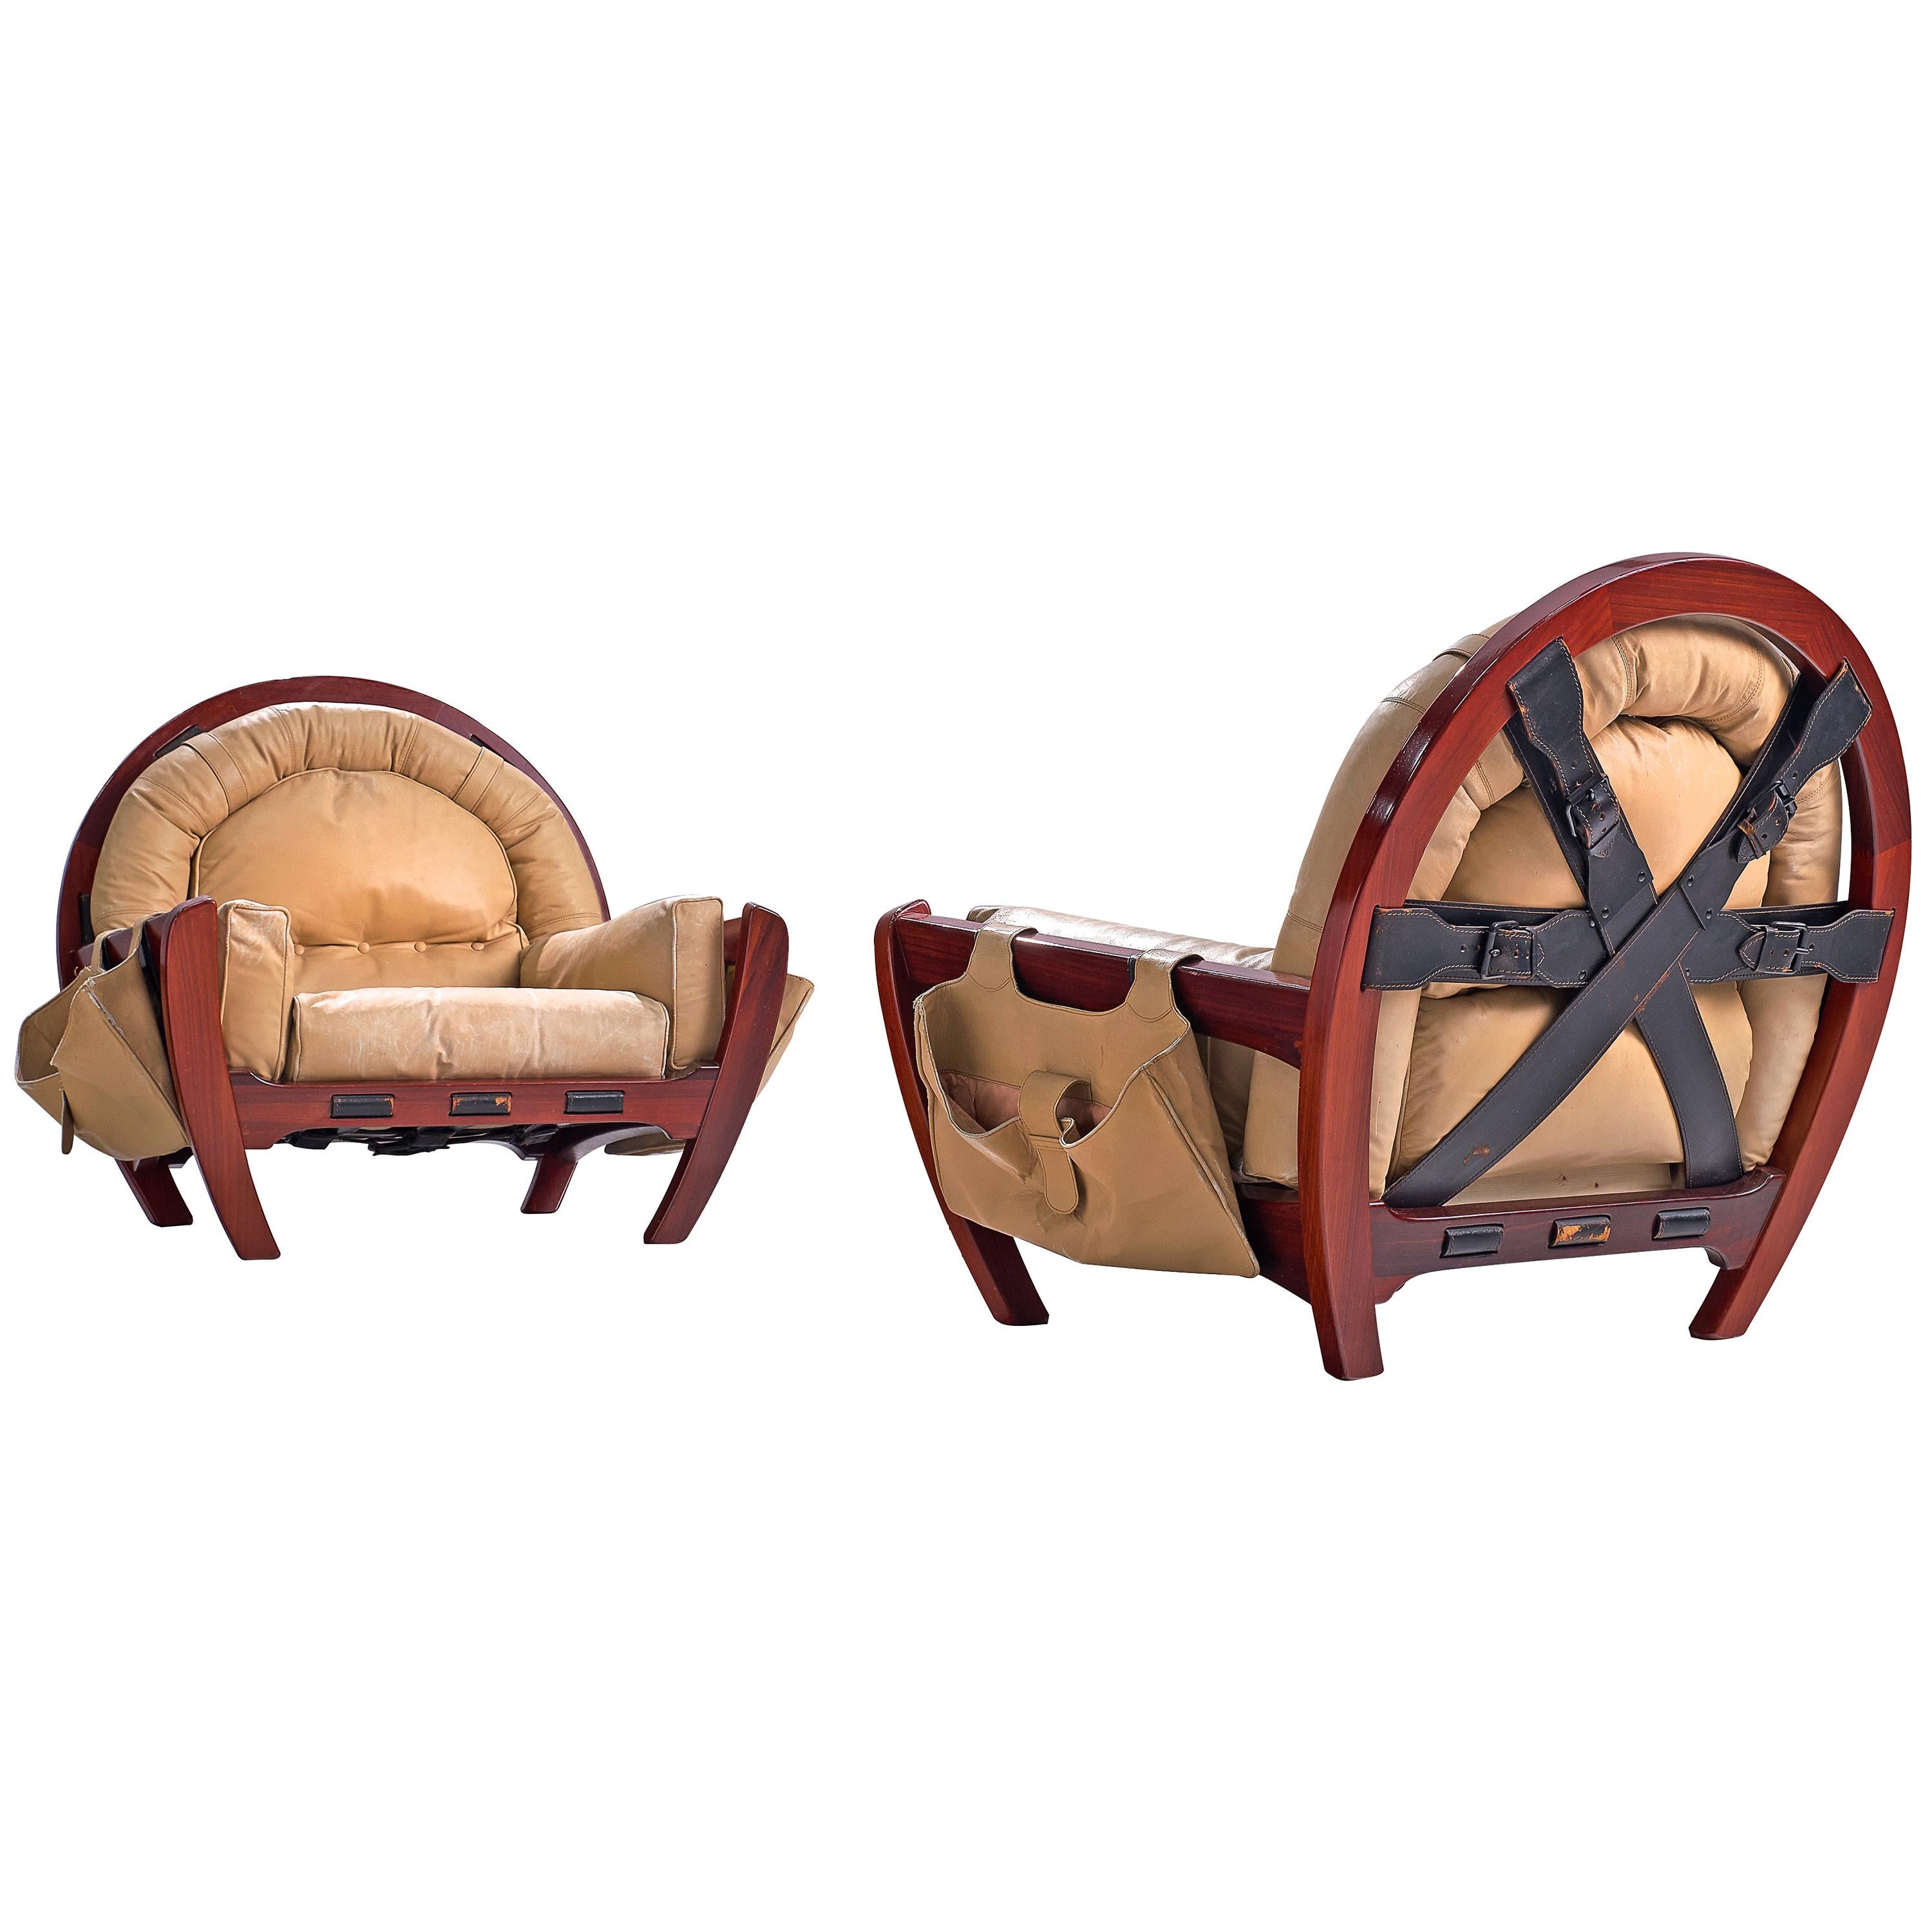 Luciano Frigerio Pair of 'Rancero' Lounge Chairs in Mahogany and Leather